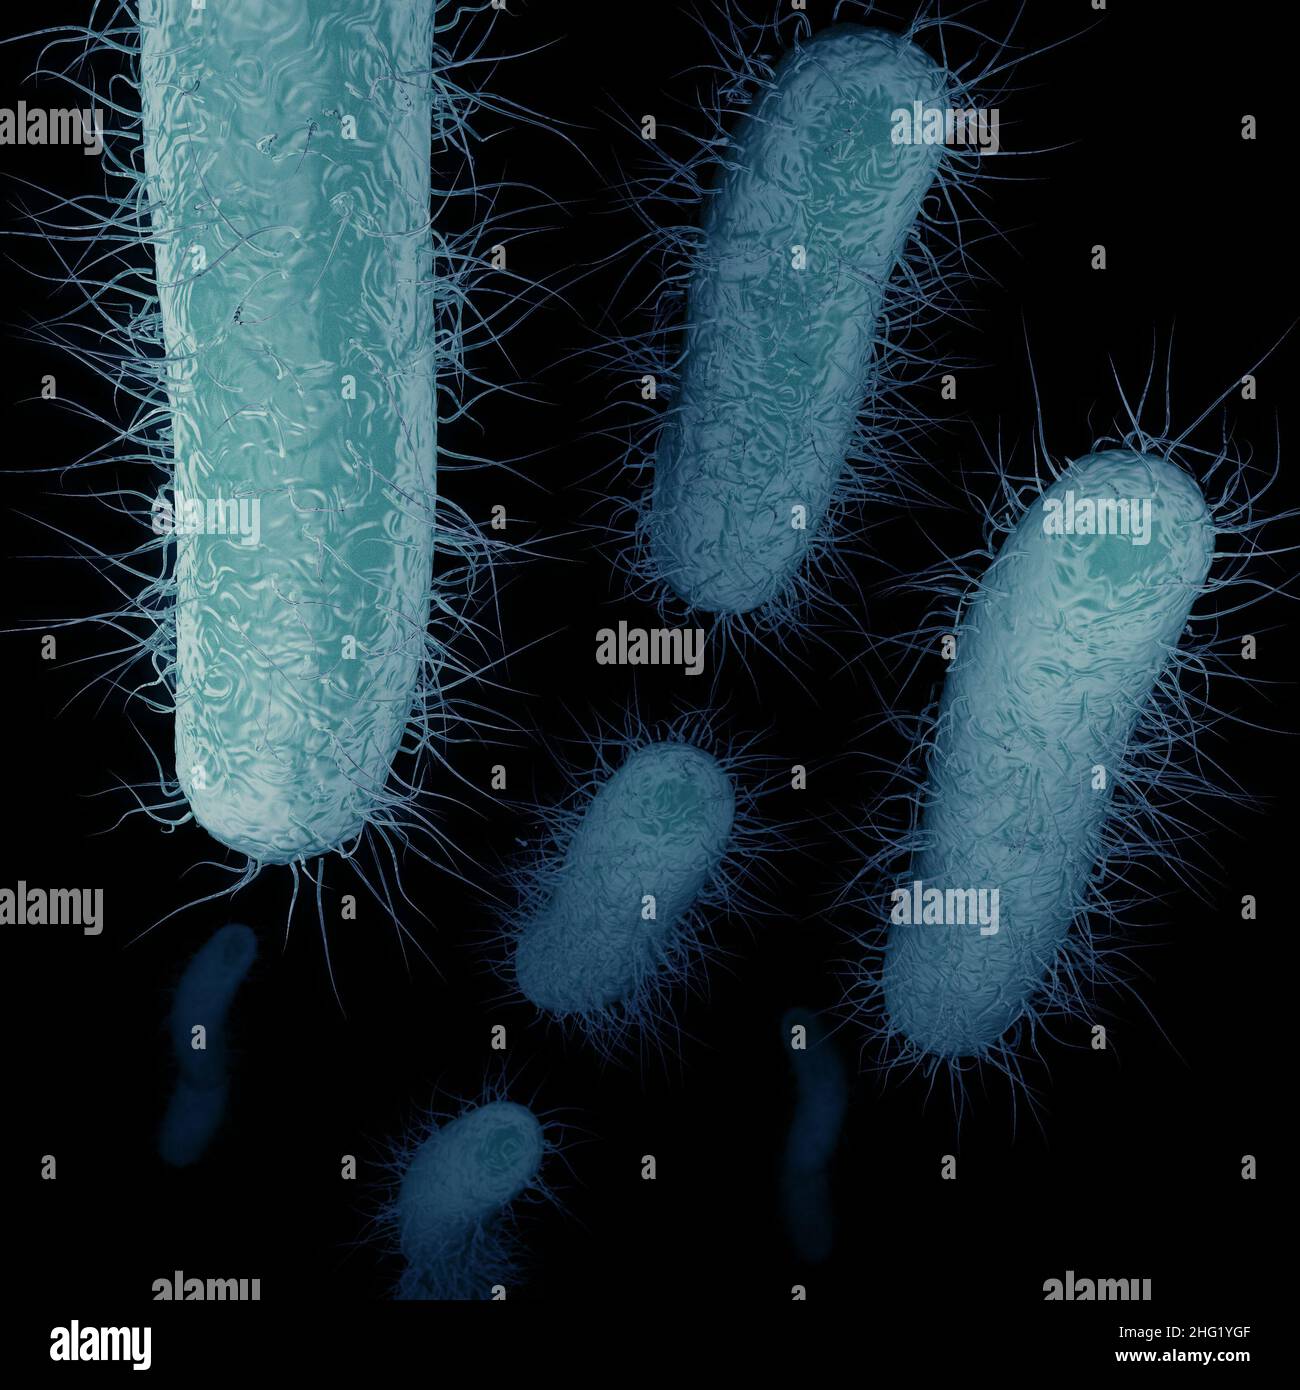 The superbug, known as Carbapenem-Resistant Enterobacteriaceae (CRE), is a type of antibiotic-resistant bacteria. Stock Photo